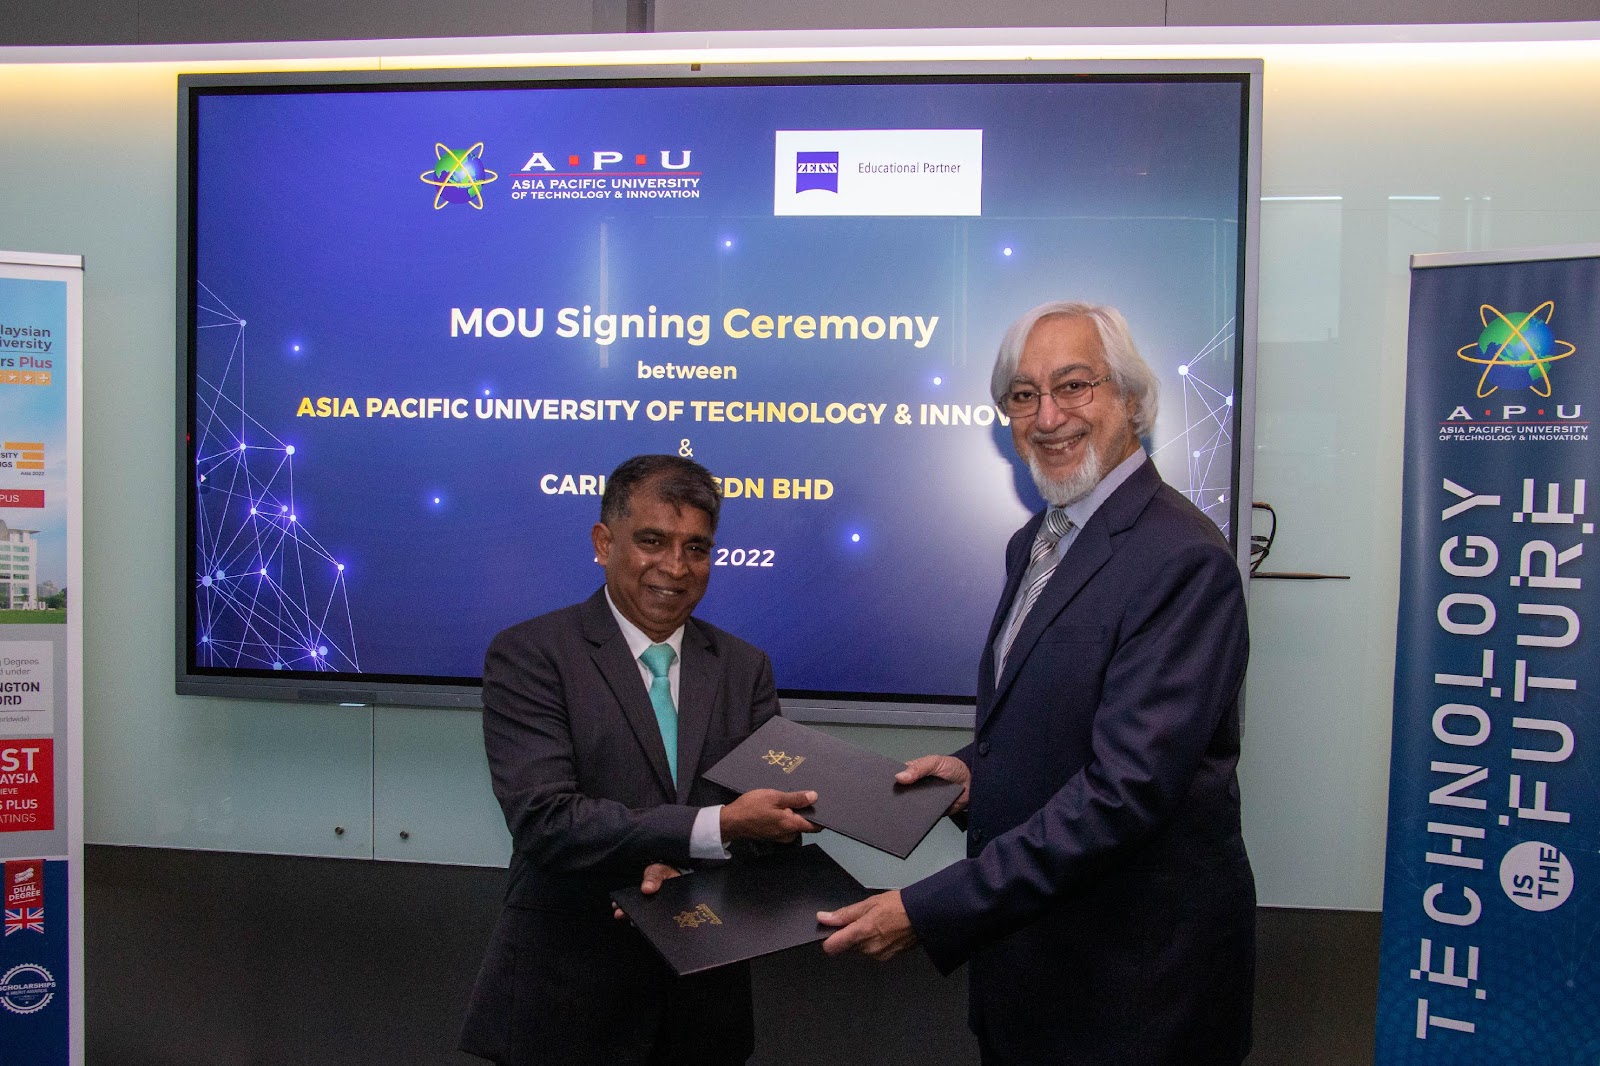 Chief Executive Officer of APU and Managing Director of Carl Zeiss Sdn Bhd celebrating the newly formed industry-academia collaboration.